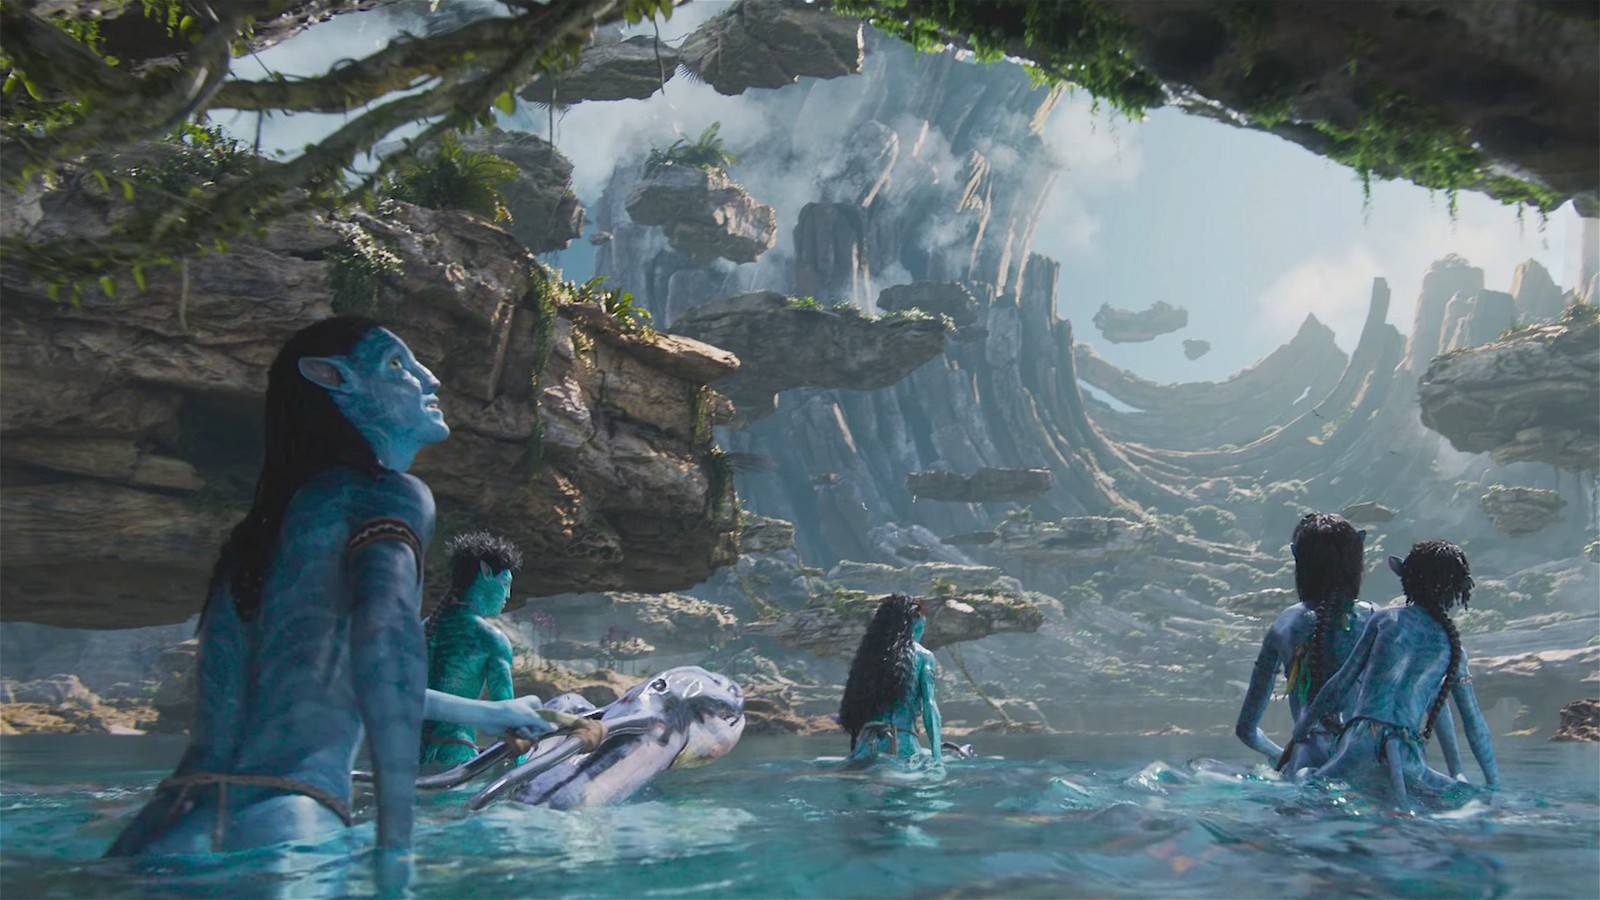 New images from James Cameron's Avatar: The Way of Water.